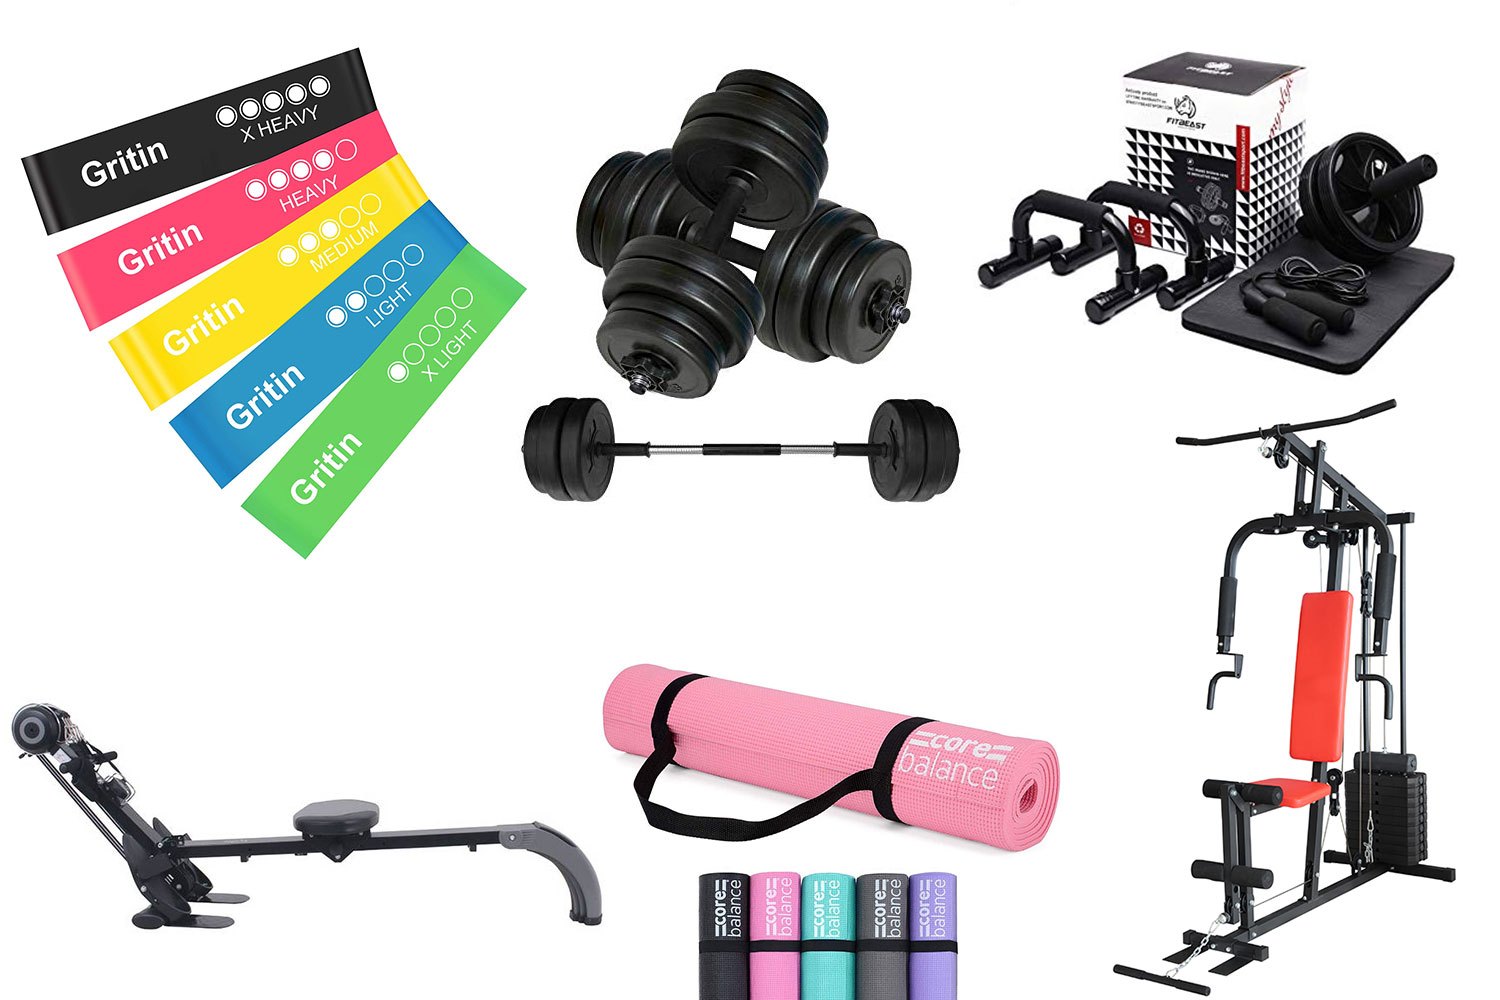 Fitness/Home Gym Equipments